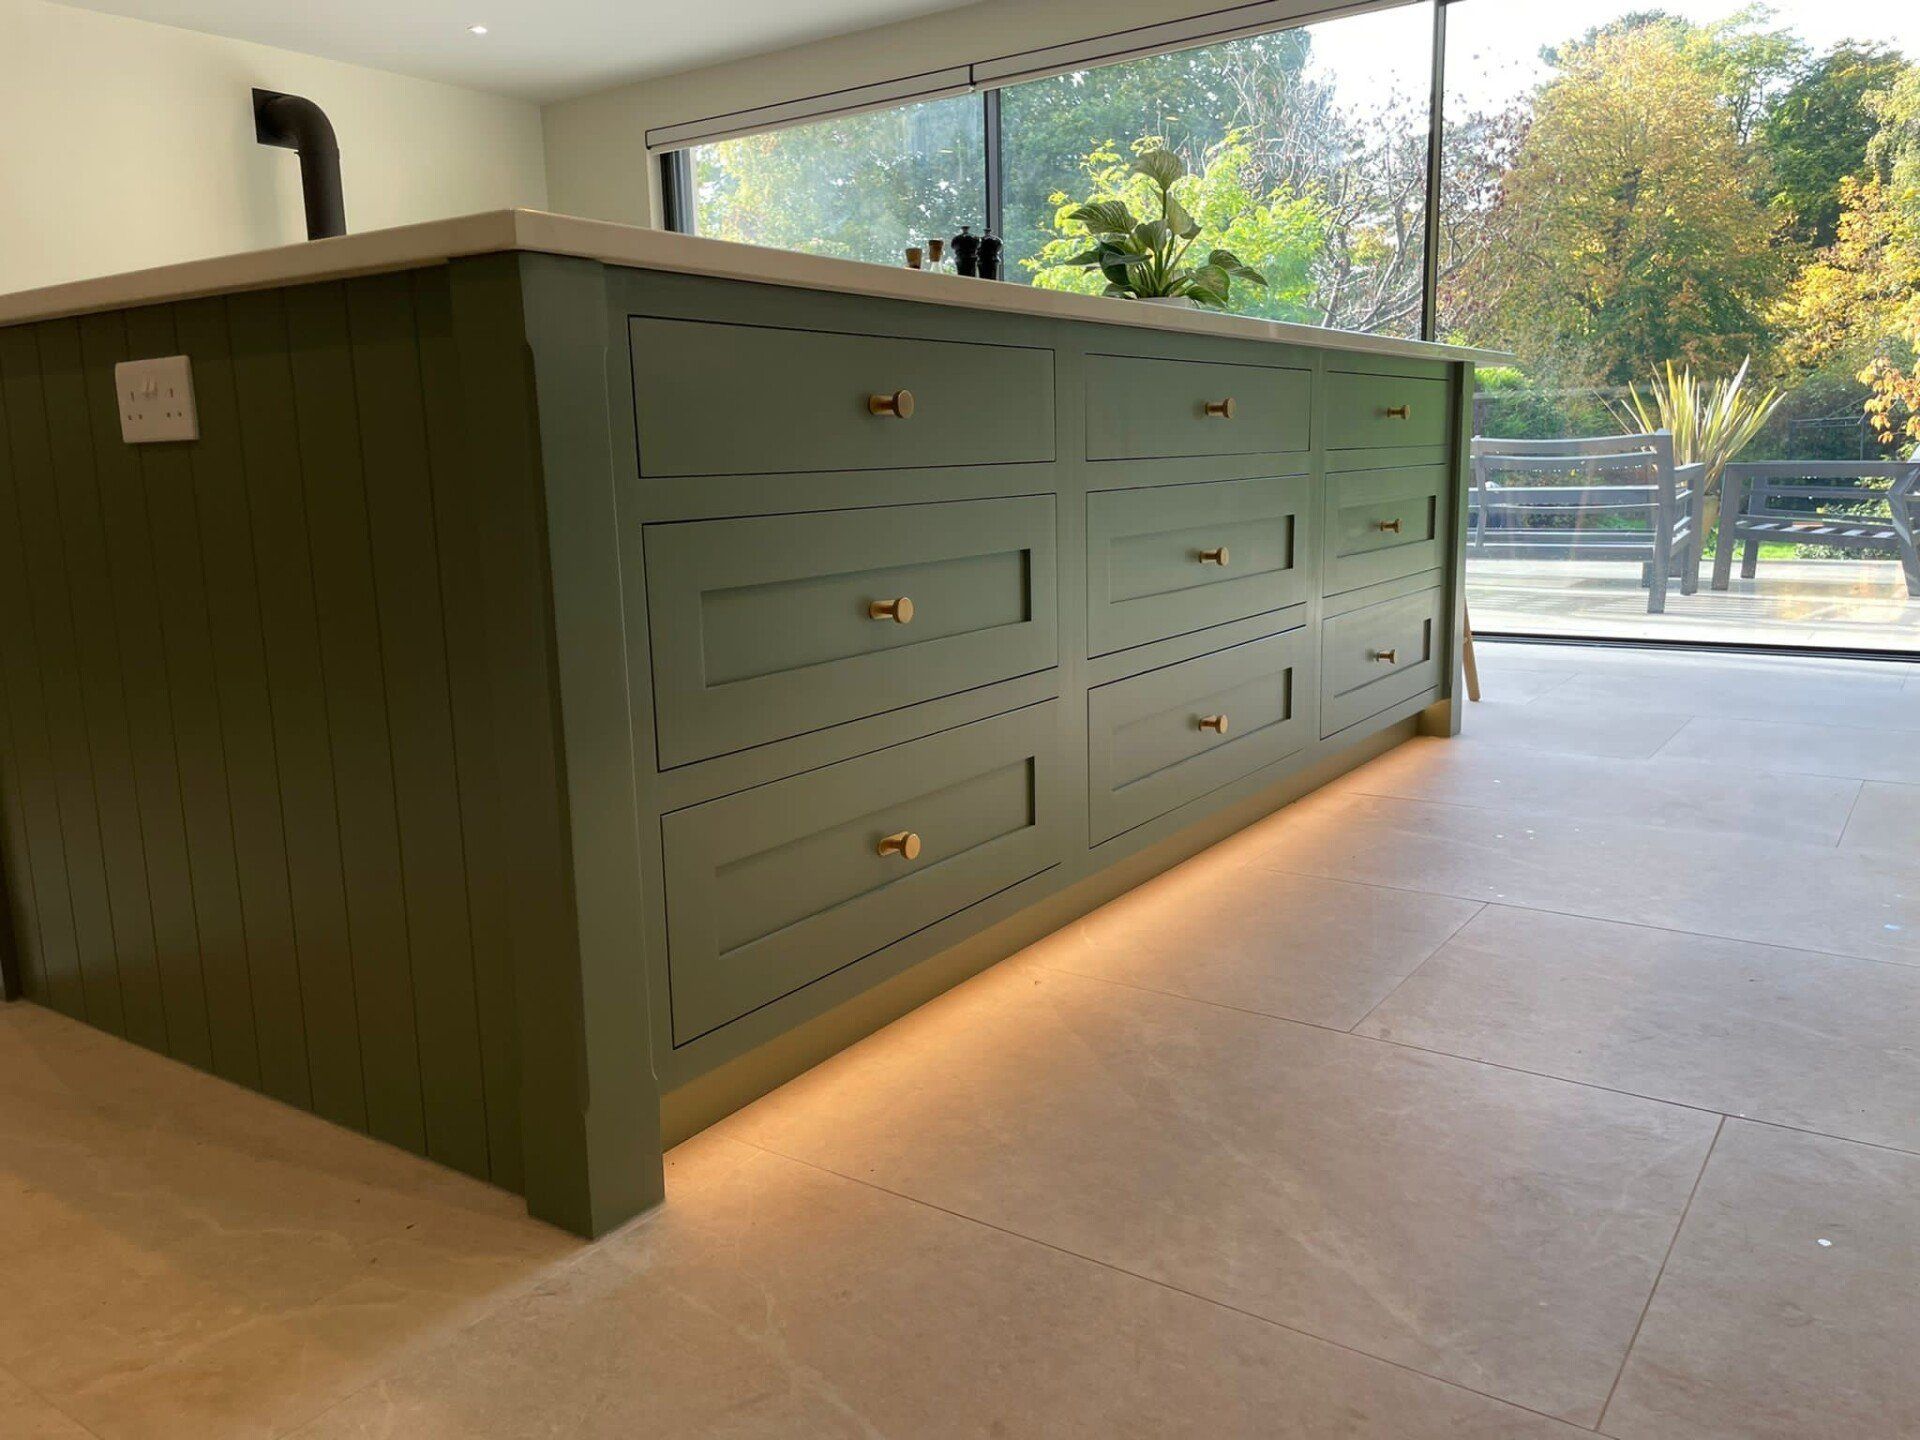 limestone effect tiles in a kitchen design with a green island and built in lights